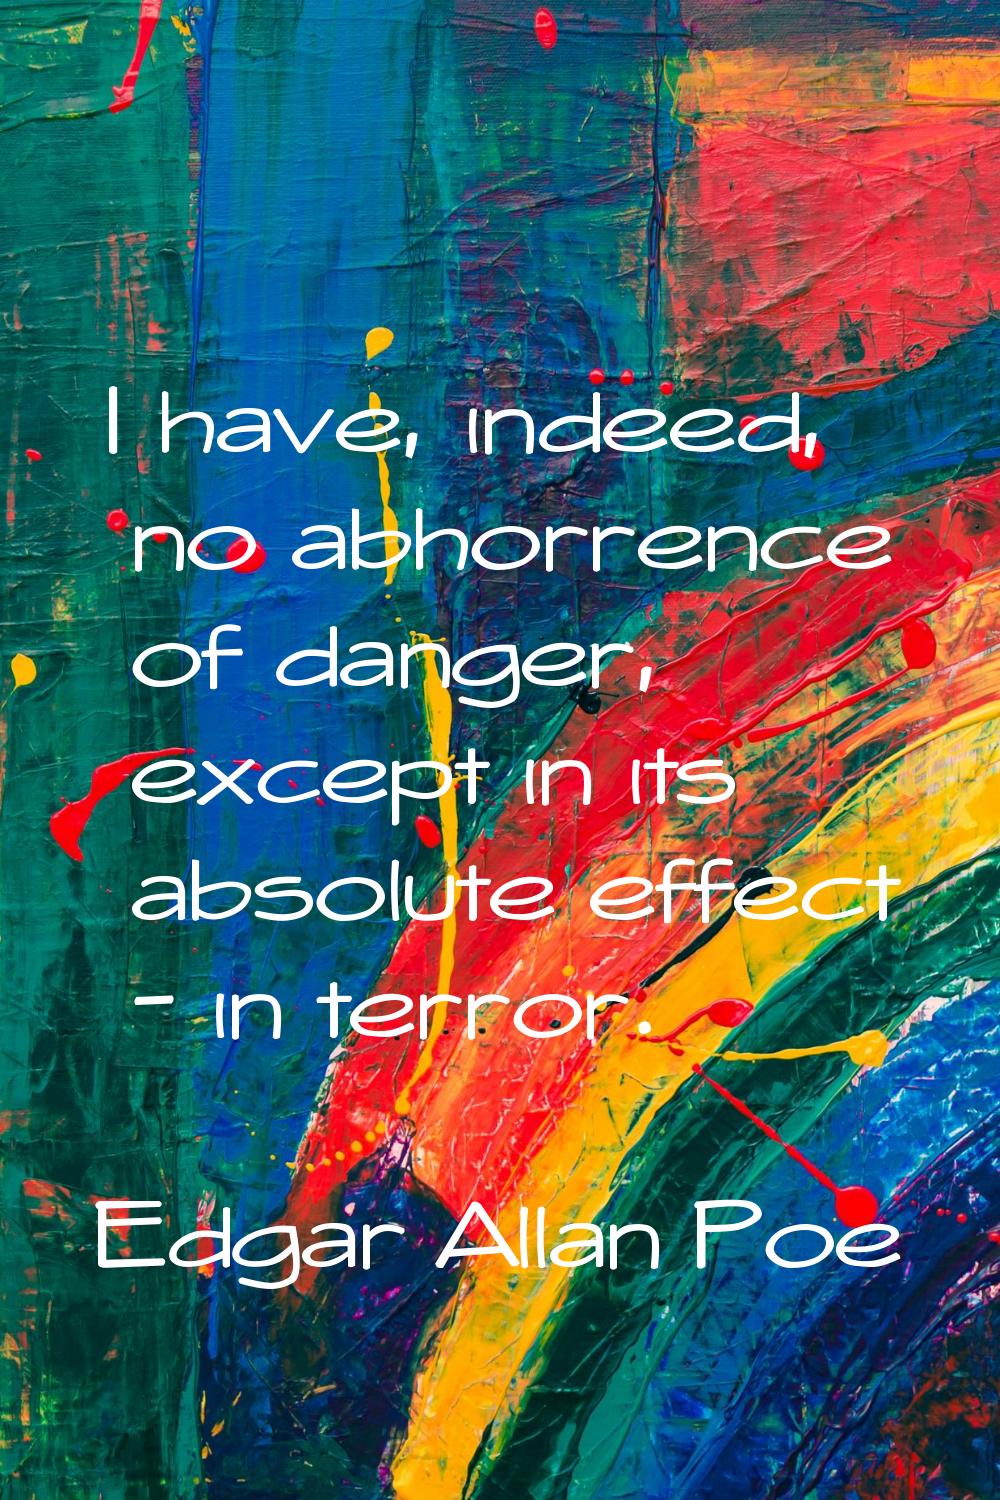 I have, indeed, no abhorrence of danger, except in its absolute effect - in terror.